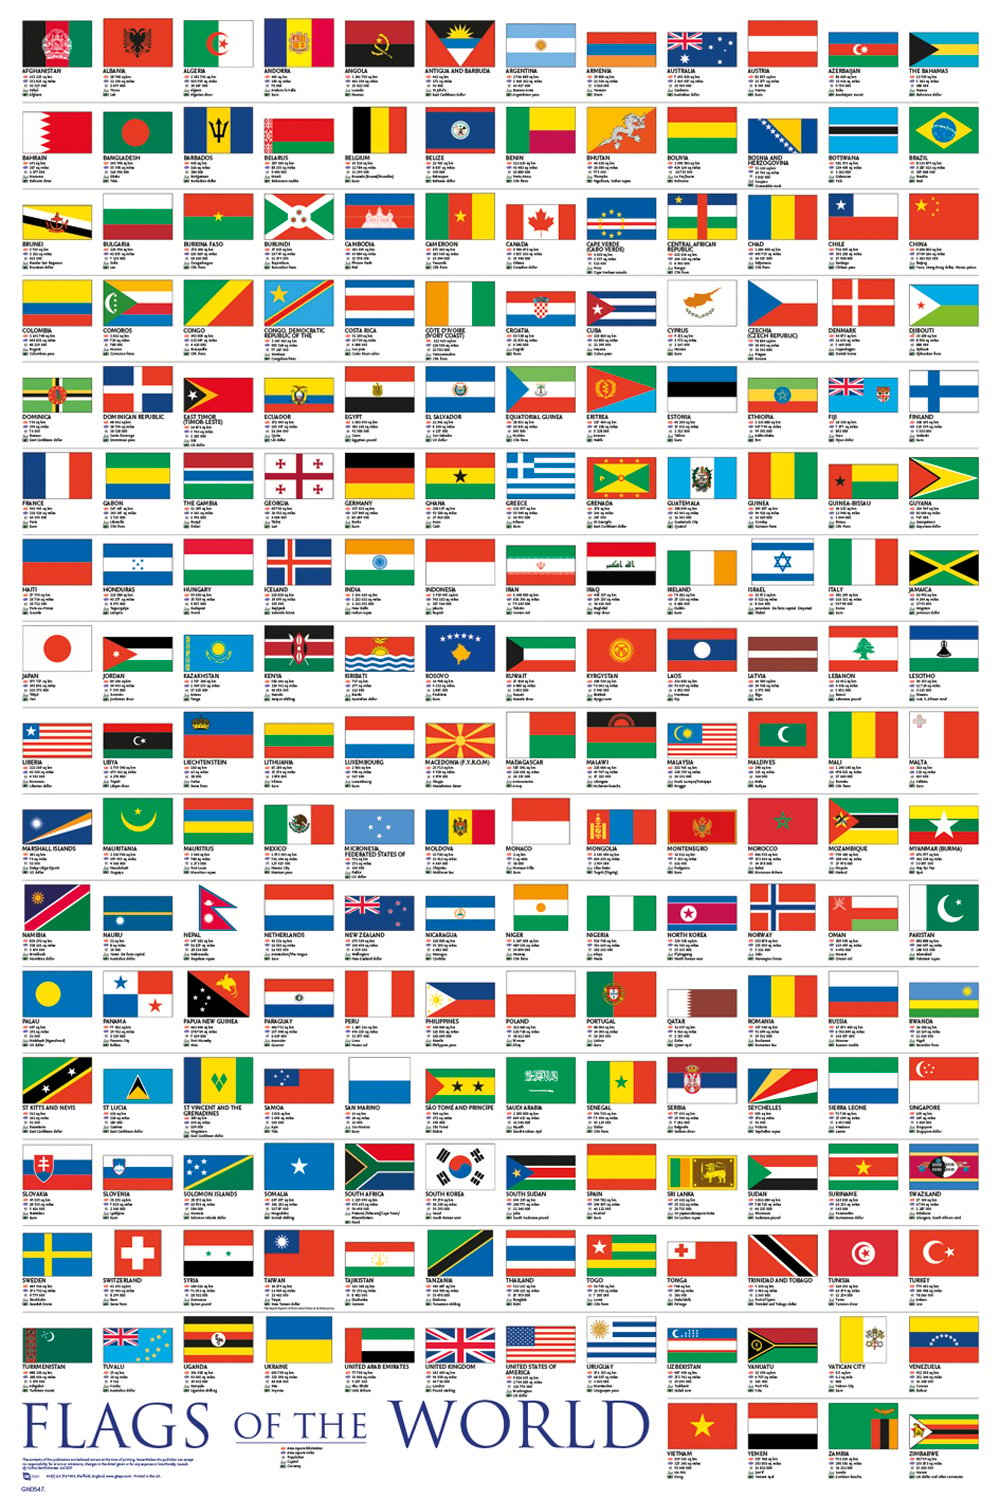 World Map with Flags World Map Maxi Poster 91,5 x 61 cm 